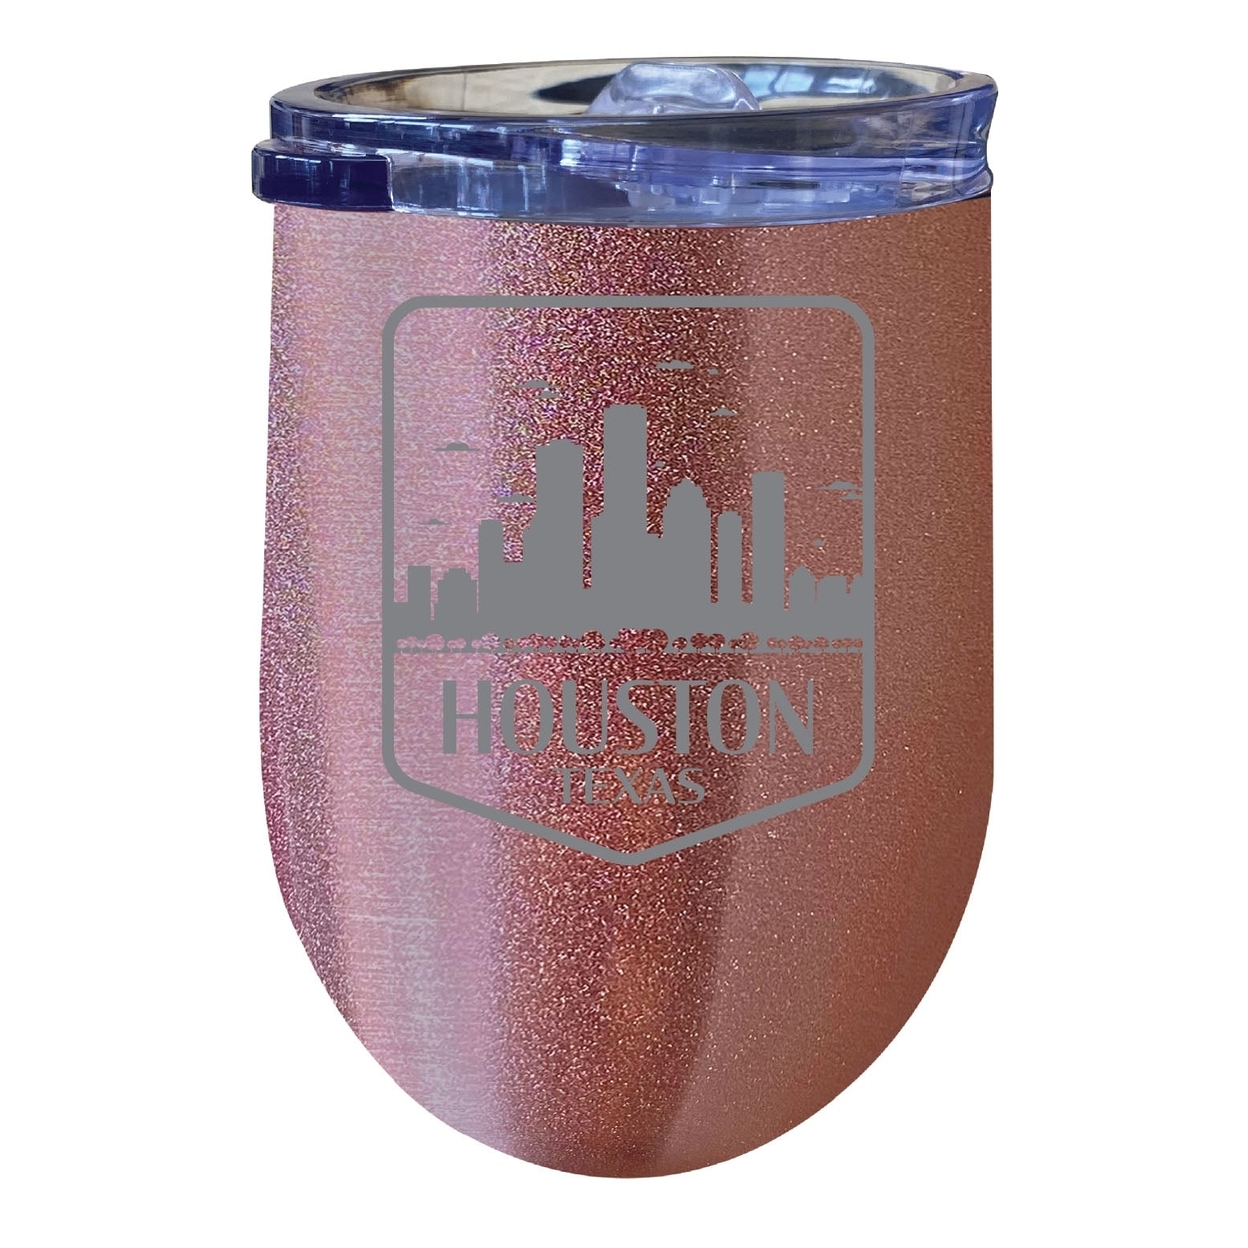 Houston Texas Souvenir 12 Oz Engraved Insulated Wine Stainless Steel Tumbler - Rose Gold,,4-Pack